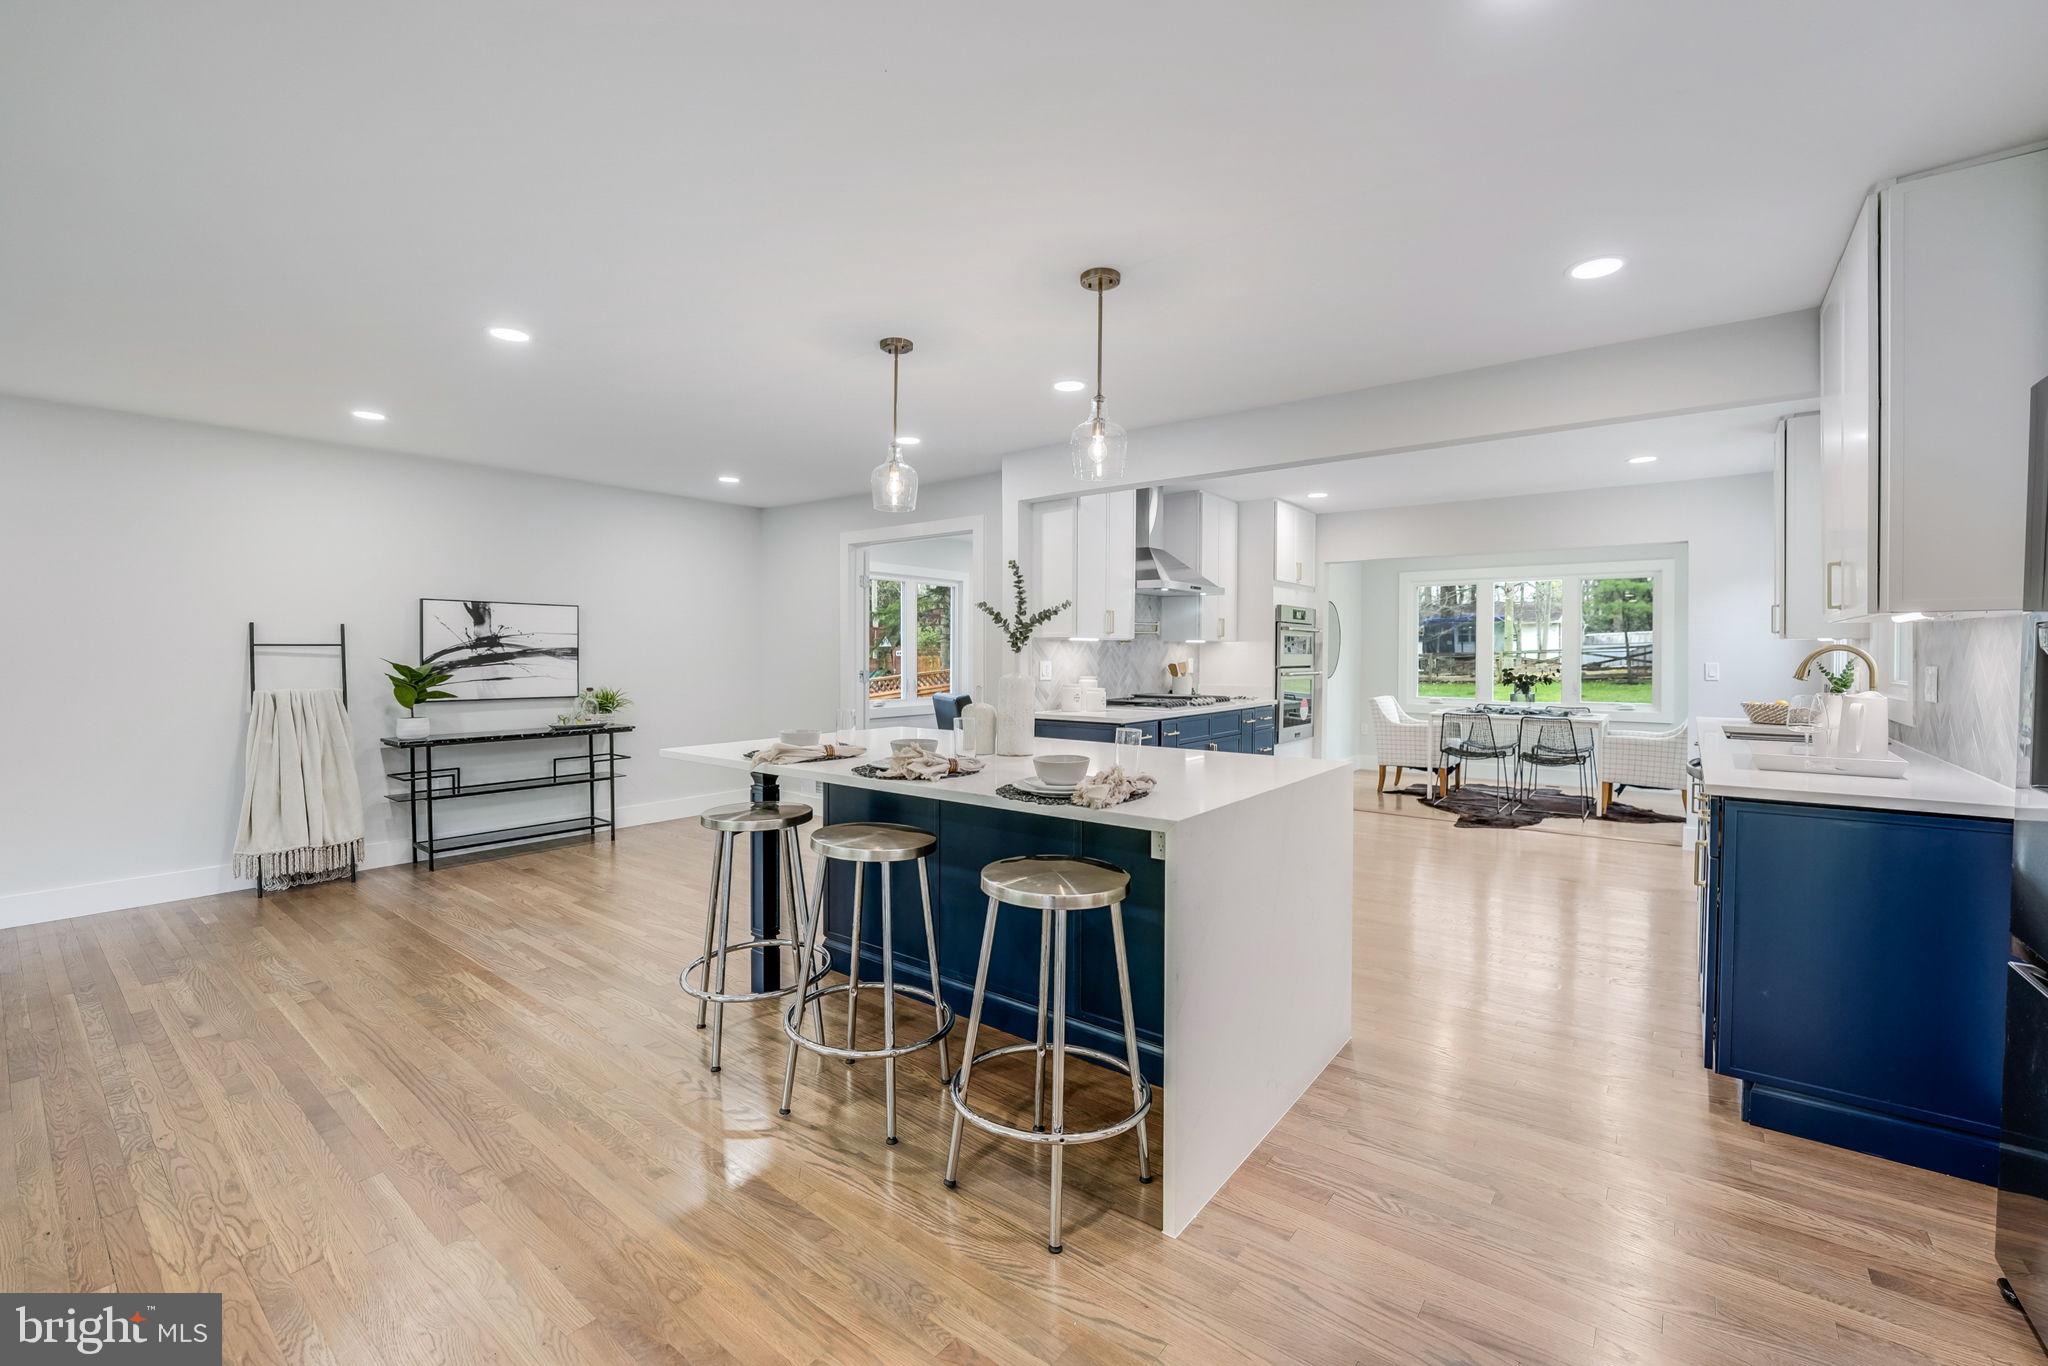 a kitchen with stainless steel appliances kitchen island granite countertop a large island in the center